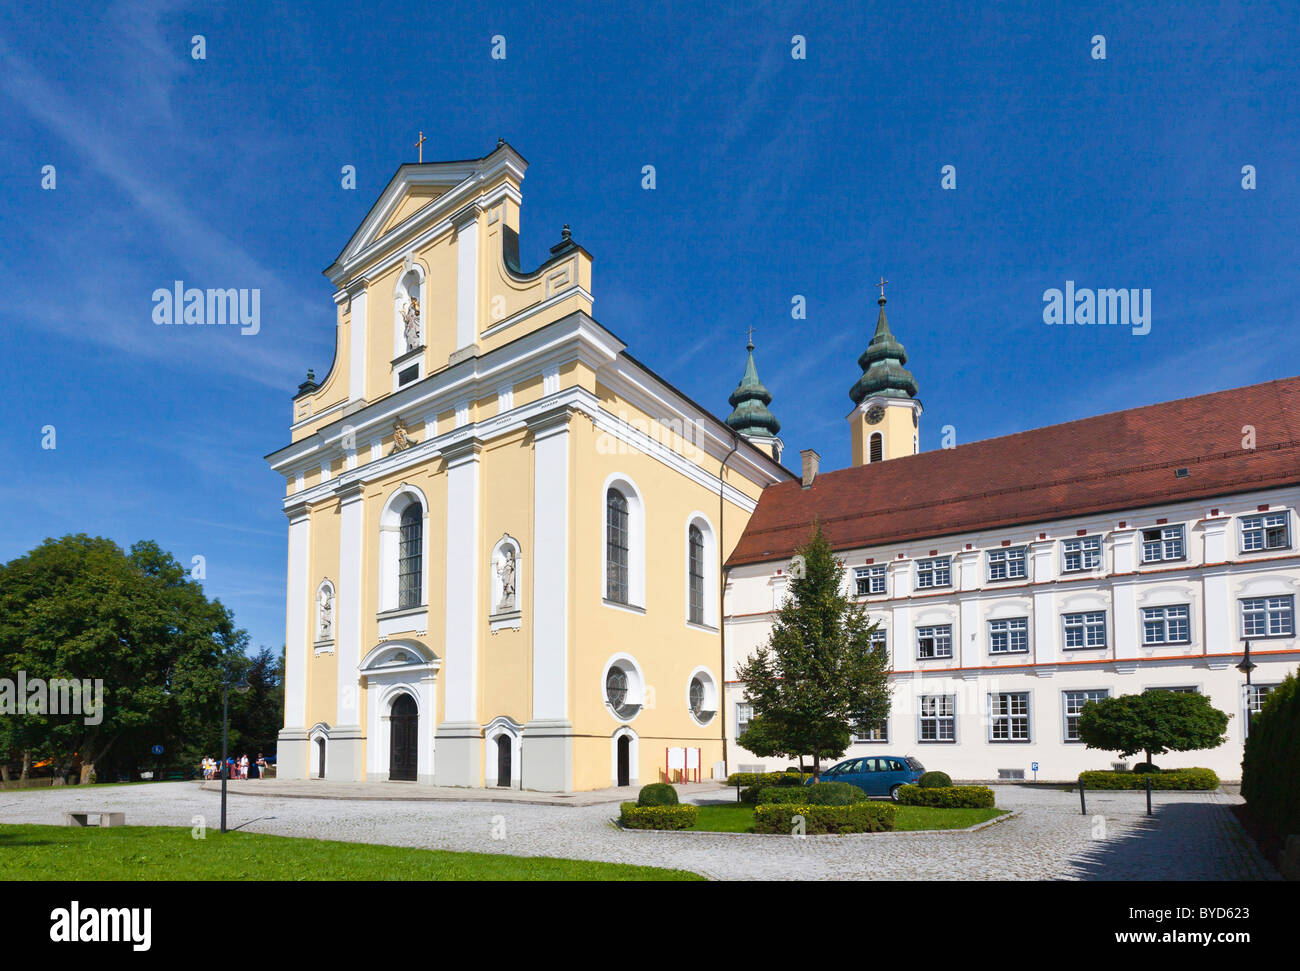 Rot an der Rot Abbey, monastery and Church of St. Verena, Rot an der Rot, Biberach district, Baden-Wuerttemberg, Germany, Europe Stock Photo